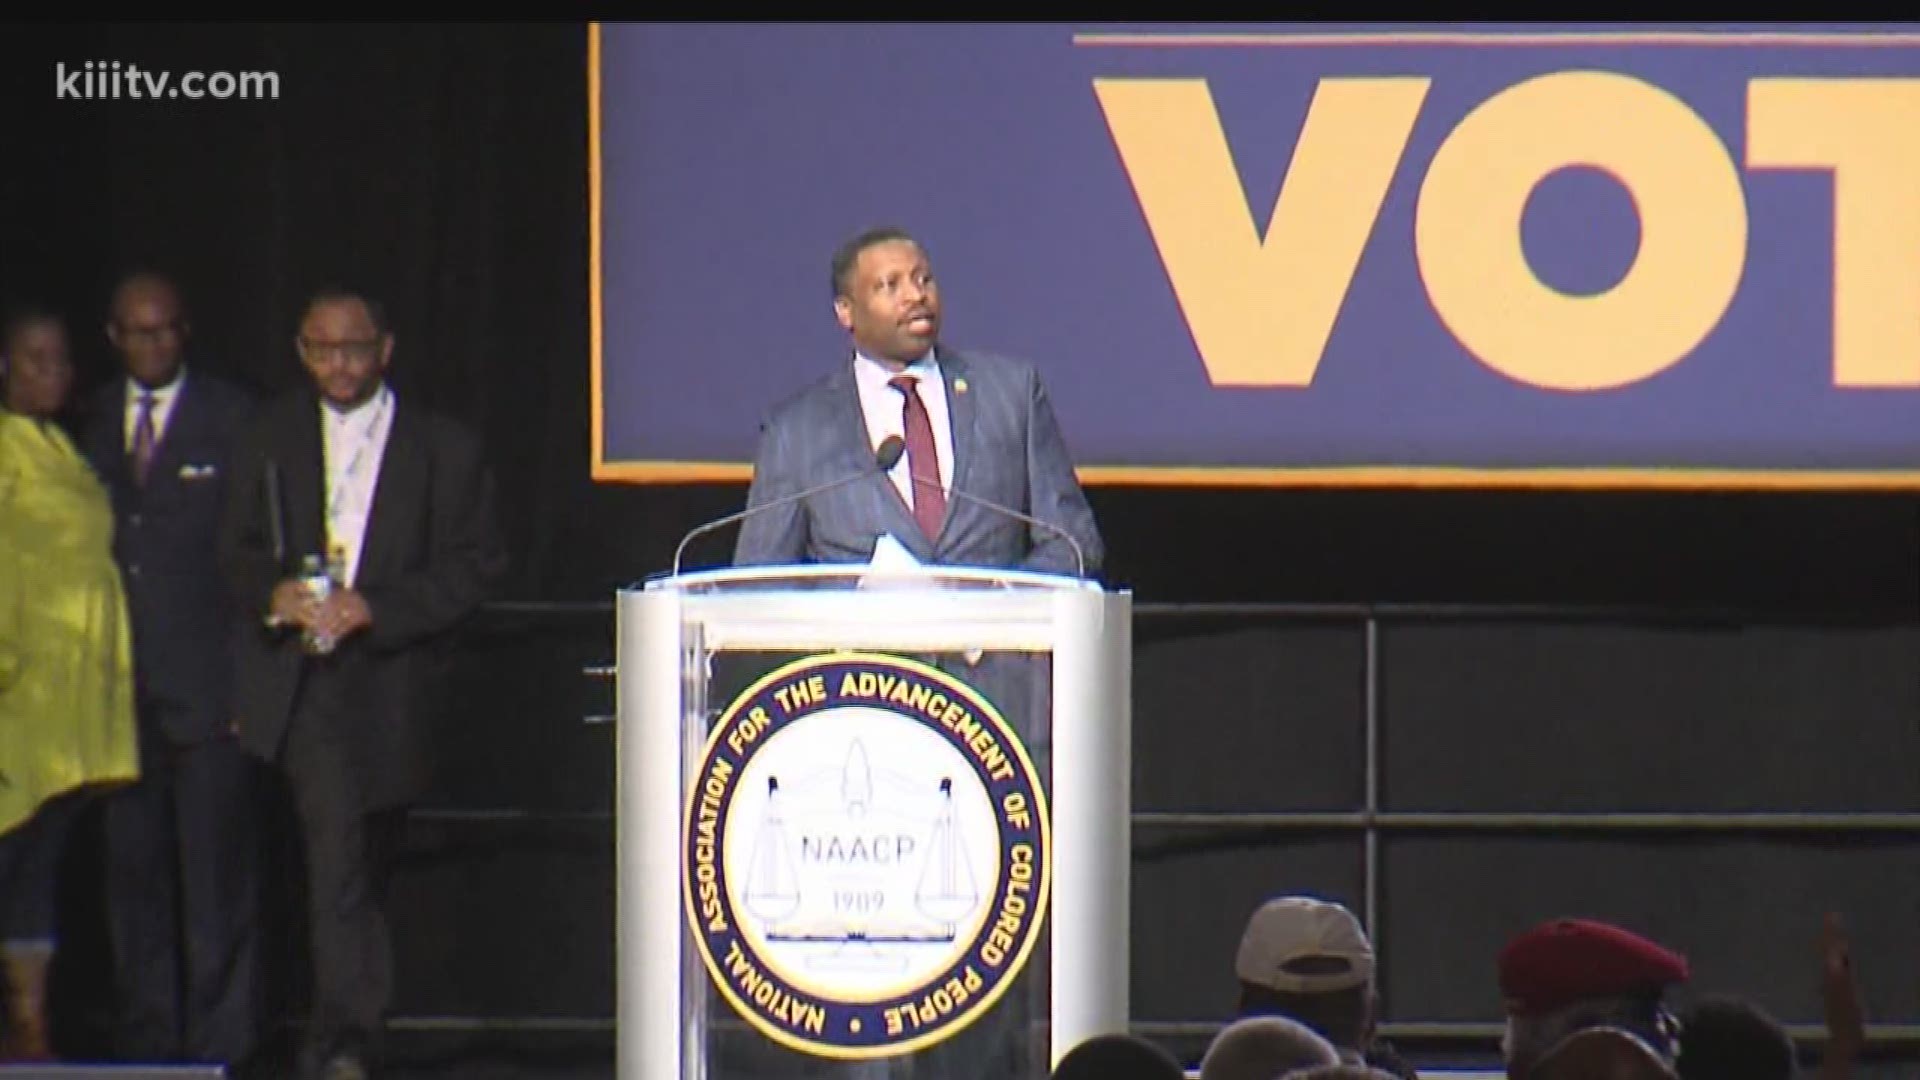 NAACP National Convention focusing on getting people out to vote